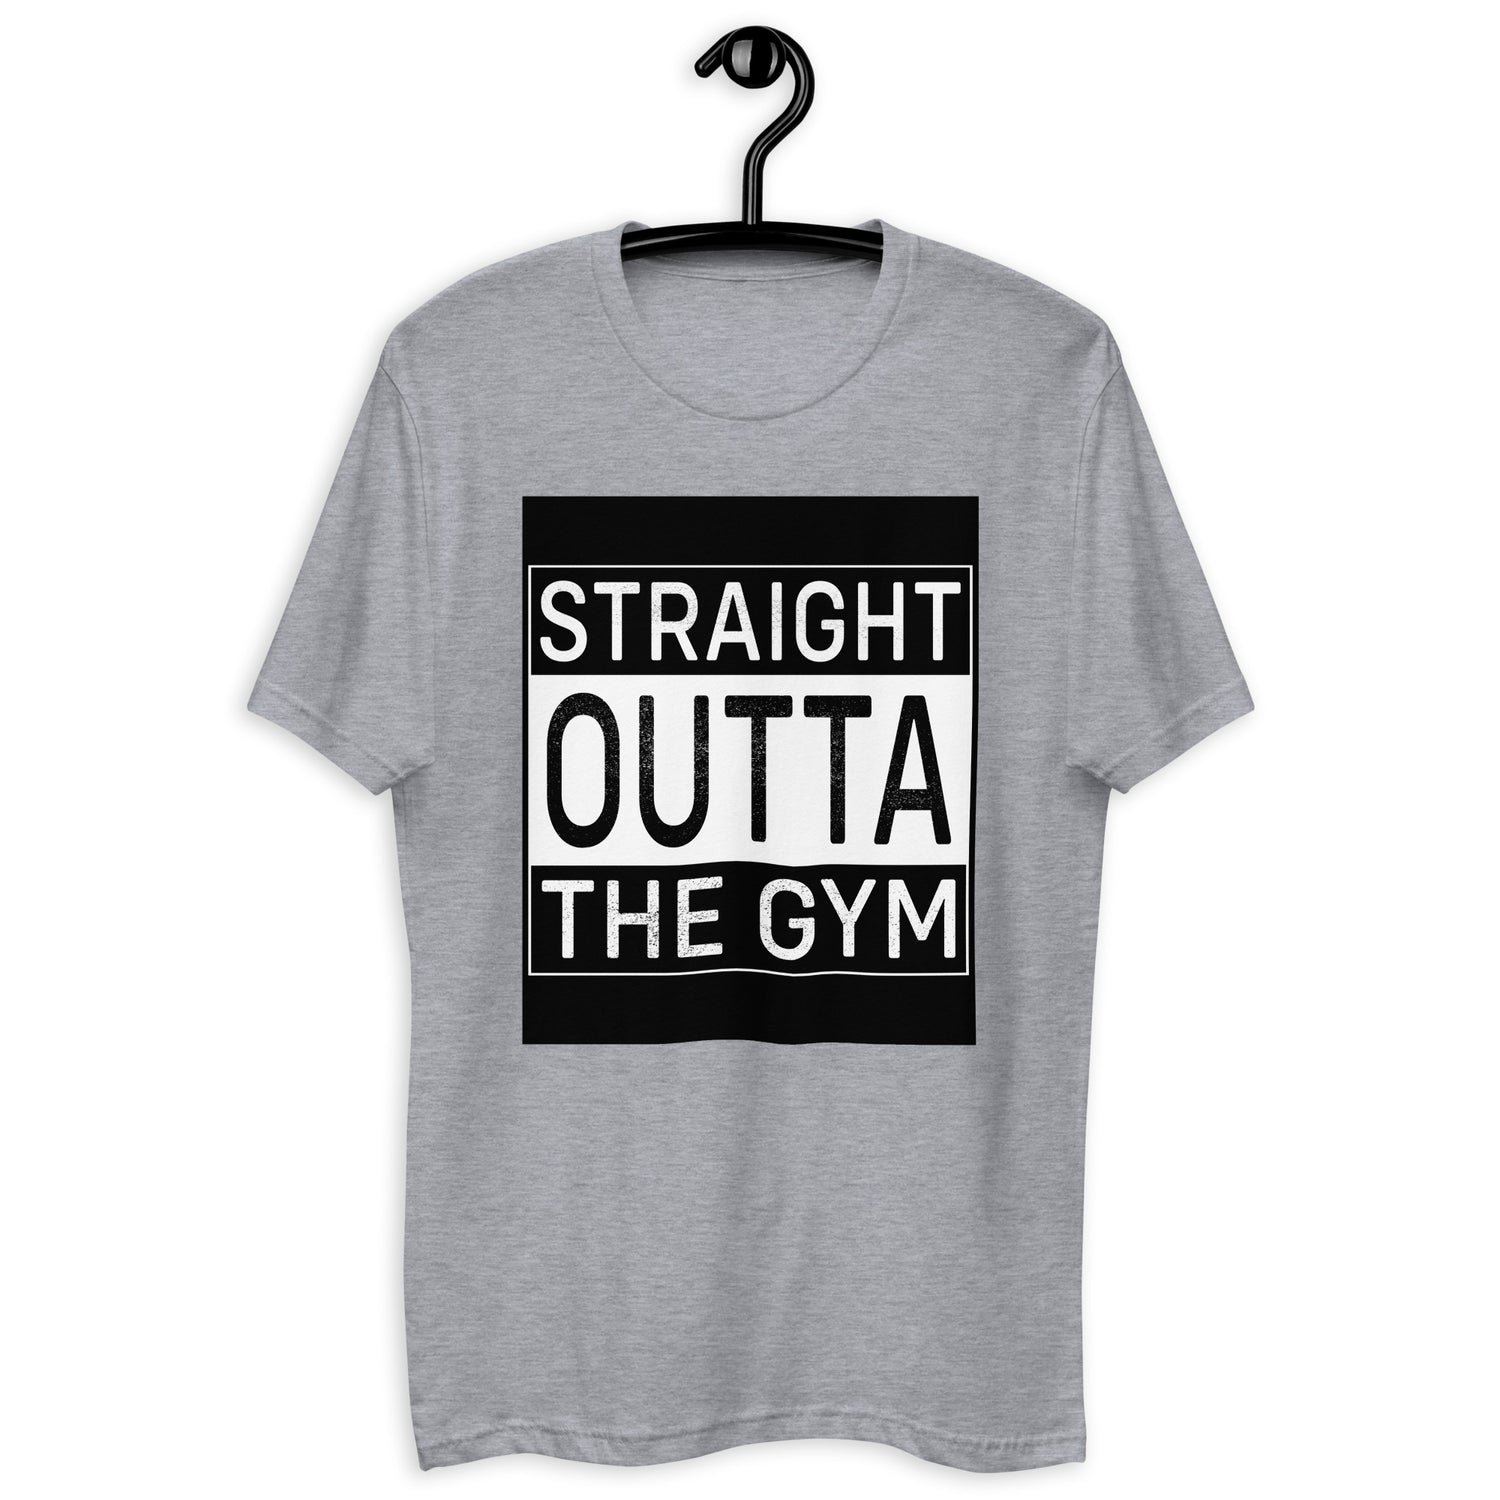 Sparkle-kiss-creations-straight-out-of-the-gym-t-shirt-heather-gray